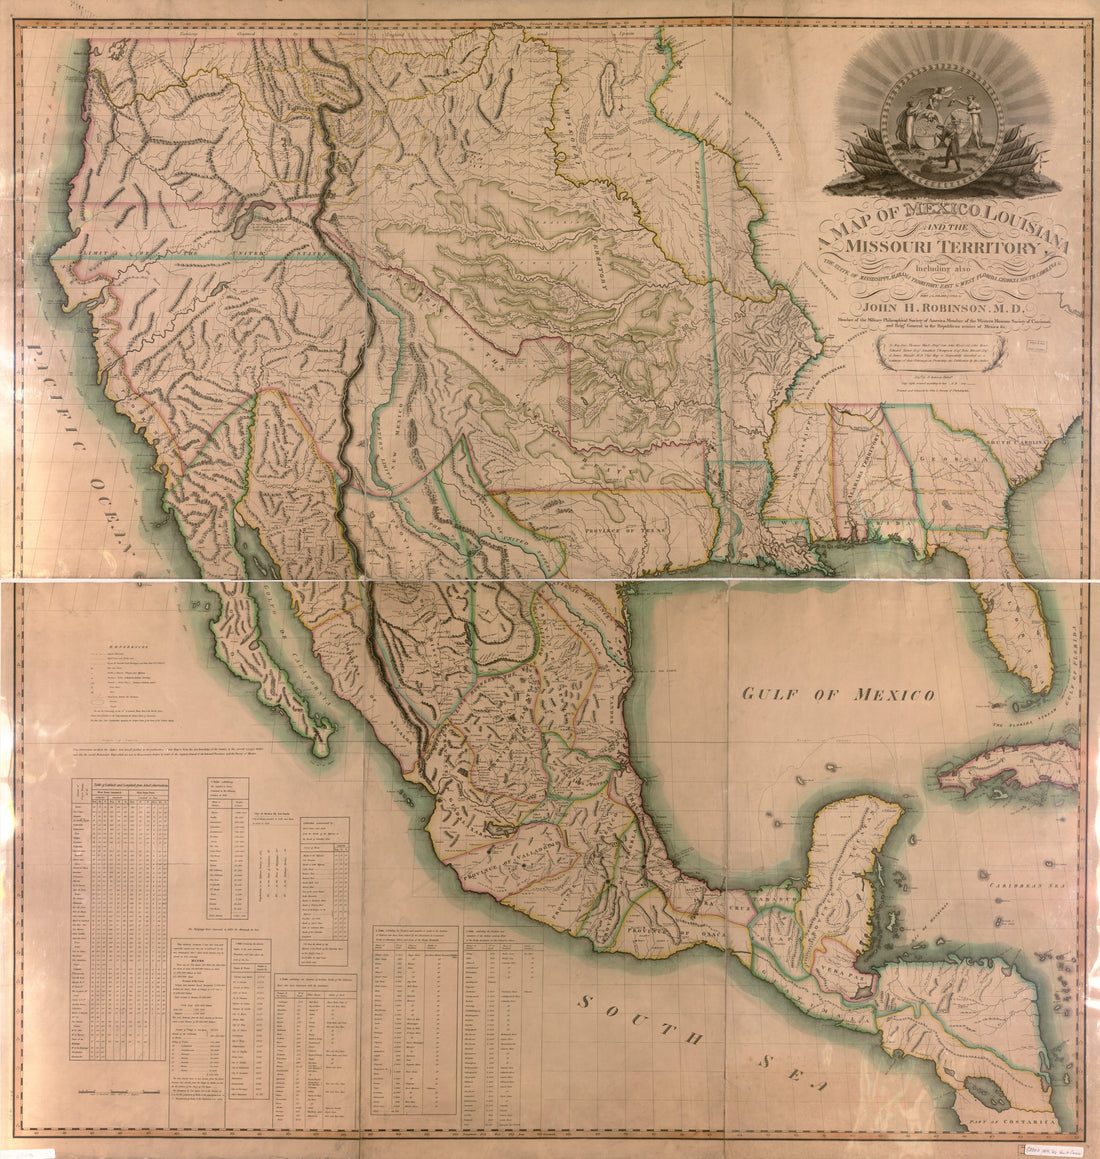 This old map of A Map of Mexico, Louisiana, and the Missouri Territory : Including Also the State of Mississippi, Alabama Territory, East and West Florida, Georgia, South Carolina &amp; Part of the Island of Cuba from 1819 was created by H. (Hugh) Anderson, 